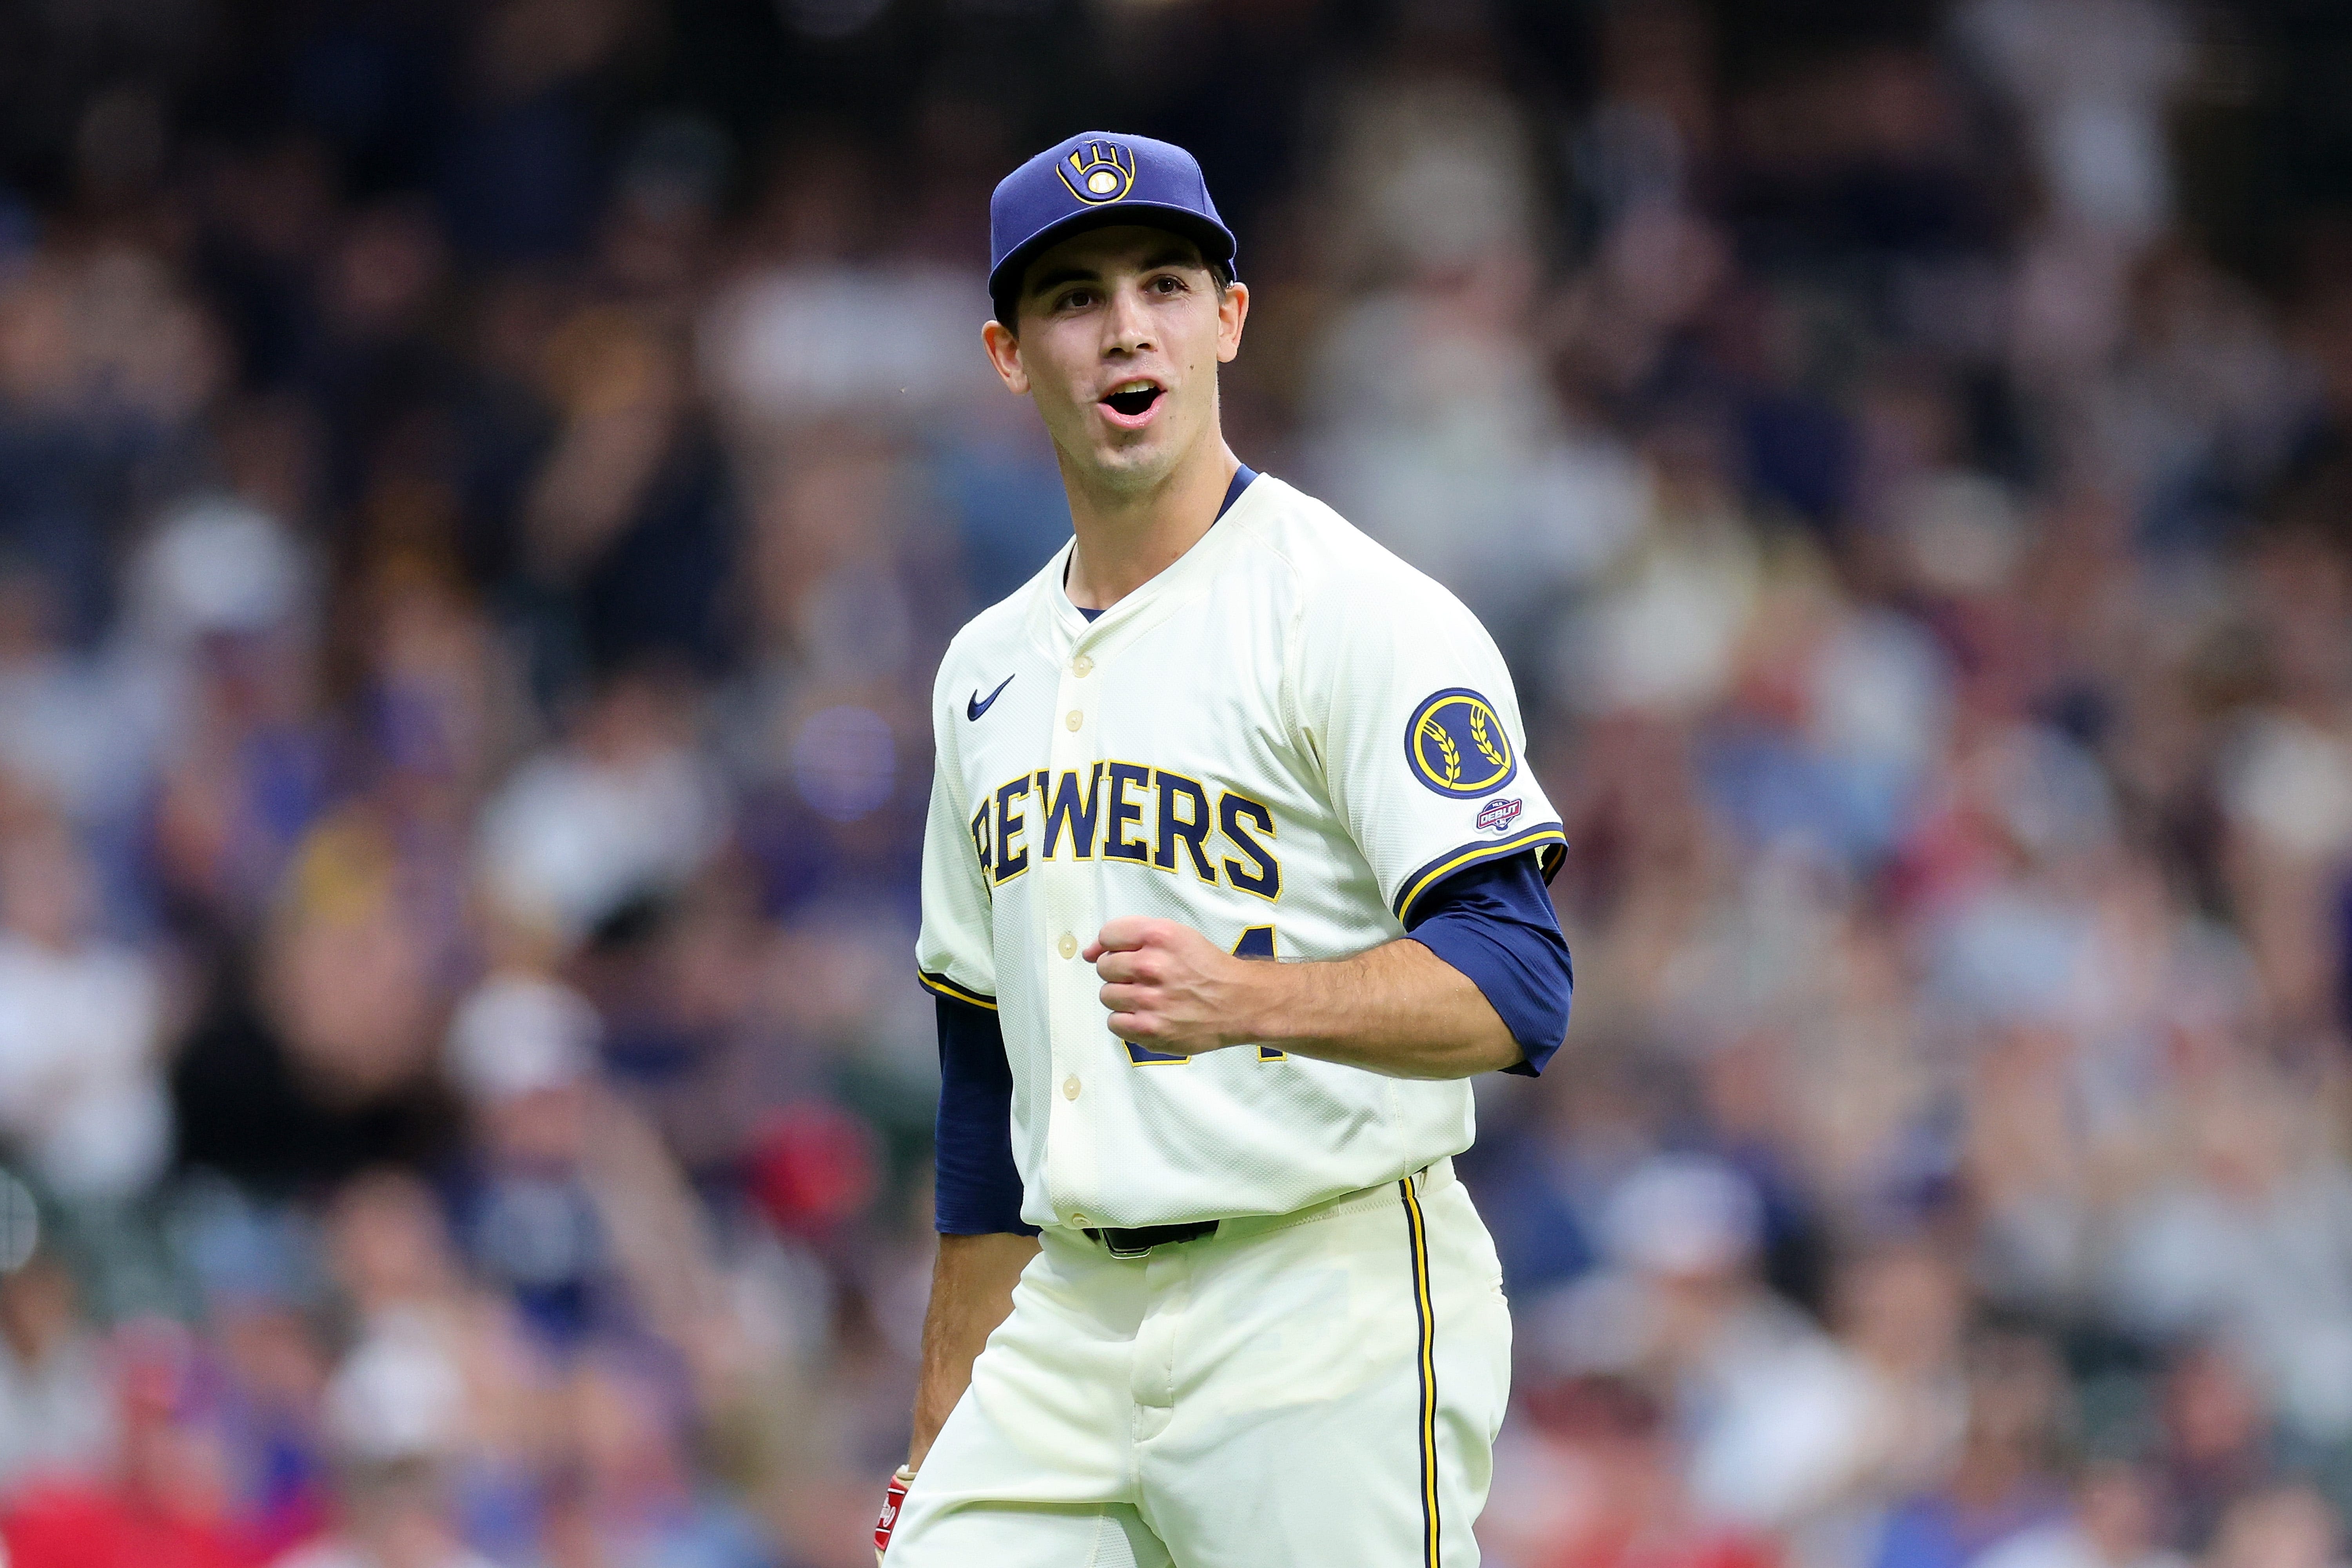 Brewers 11, Cardinals 2: A memorable debut for Robert Gasser and a blowout win for Milwaukee